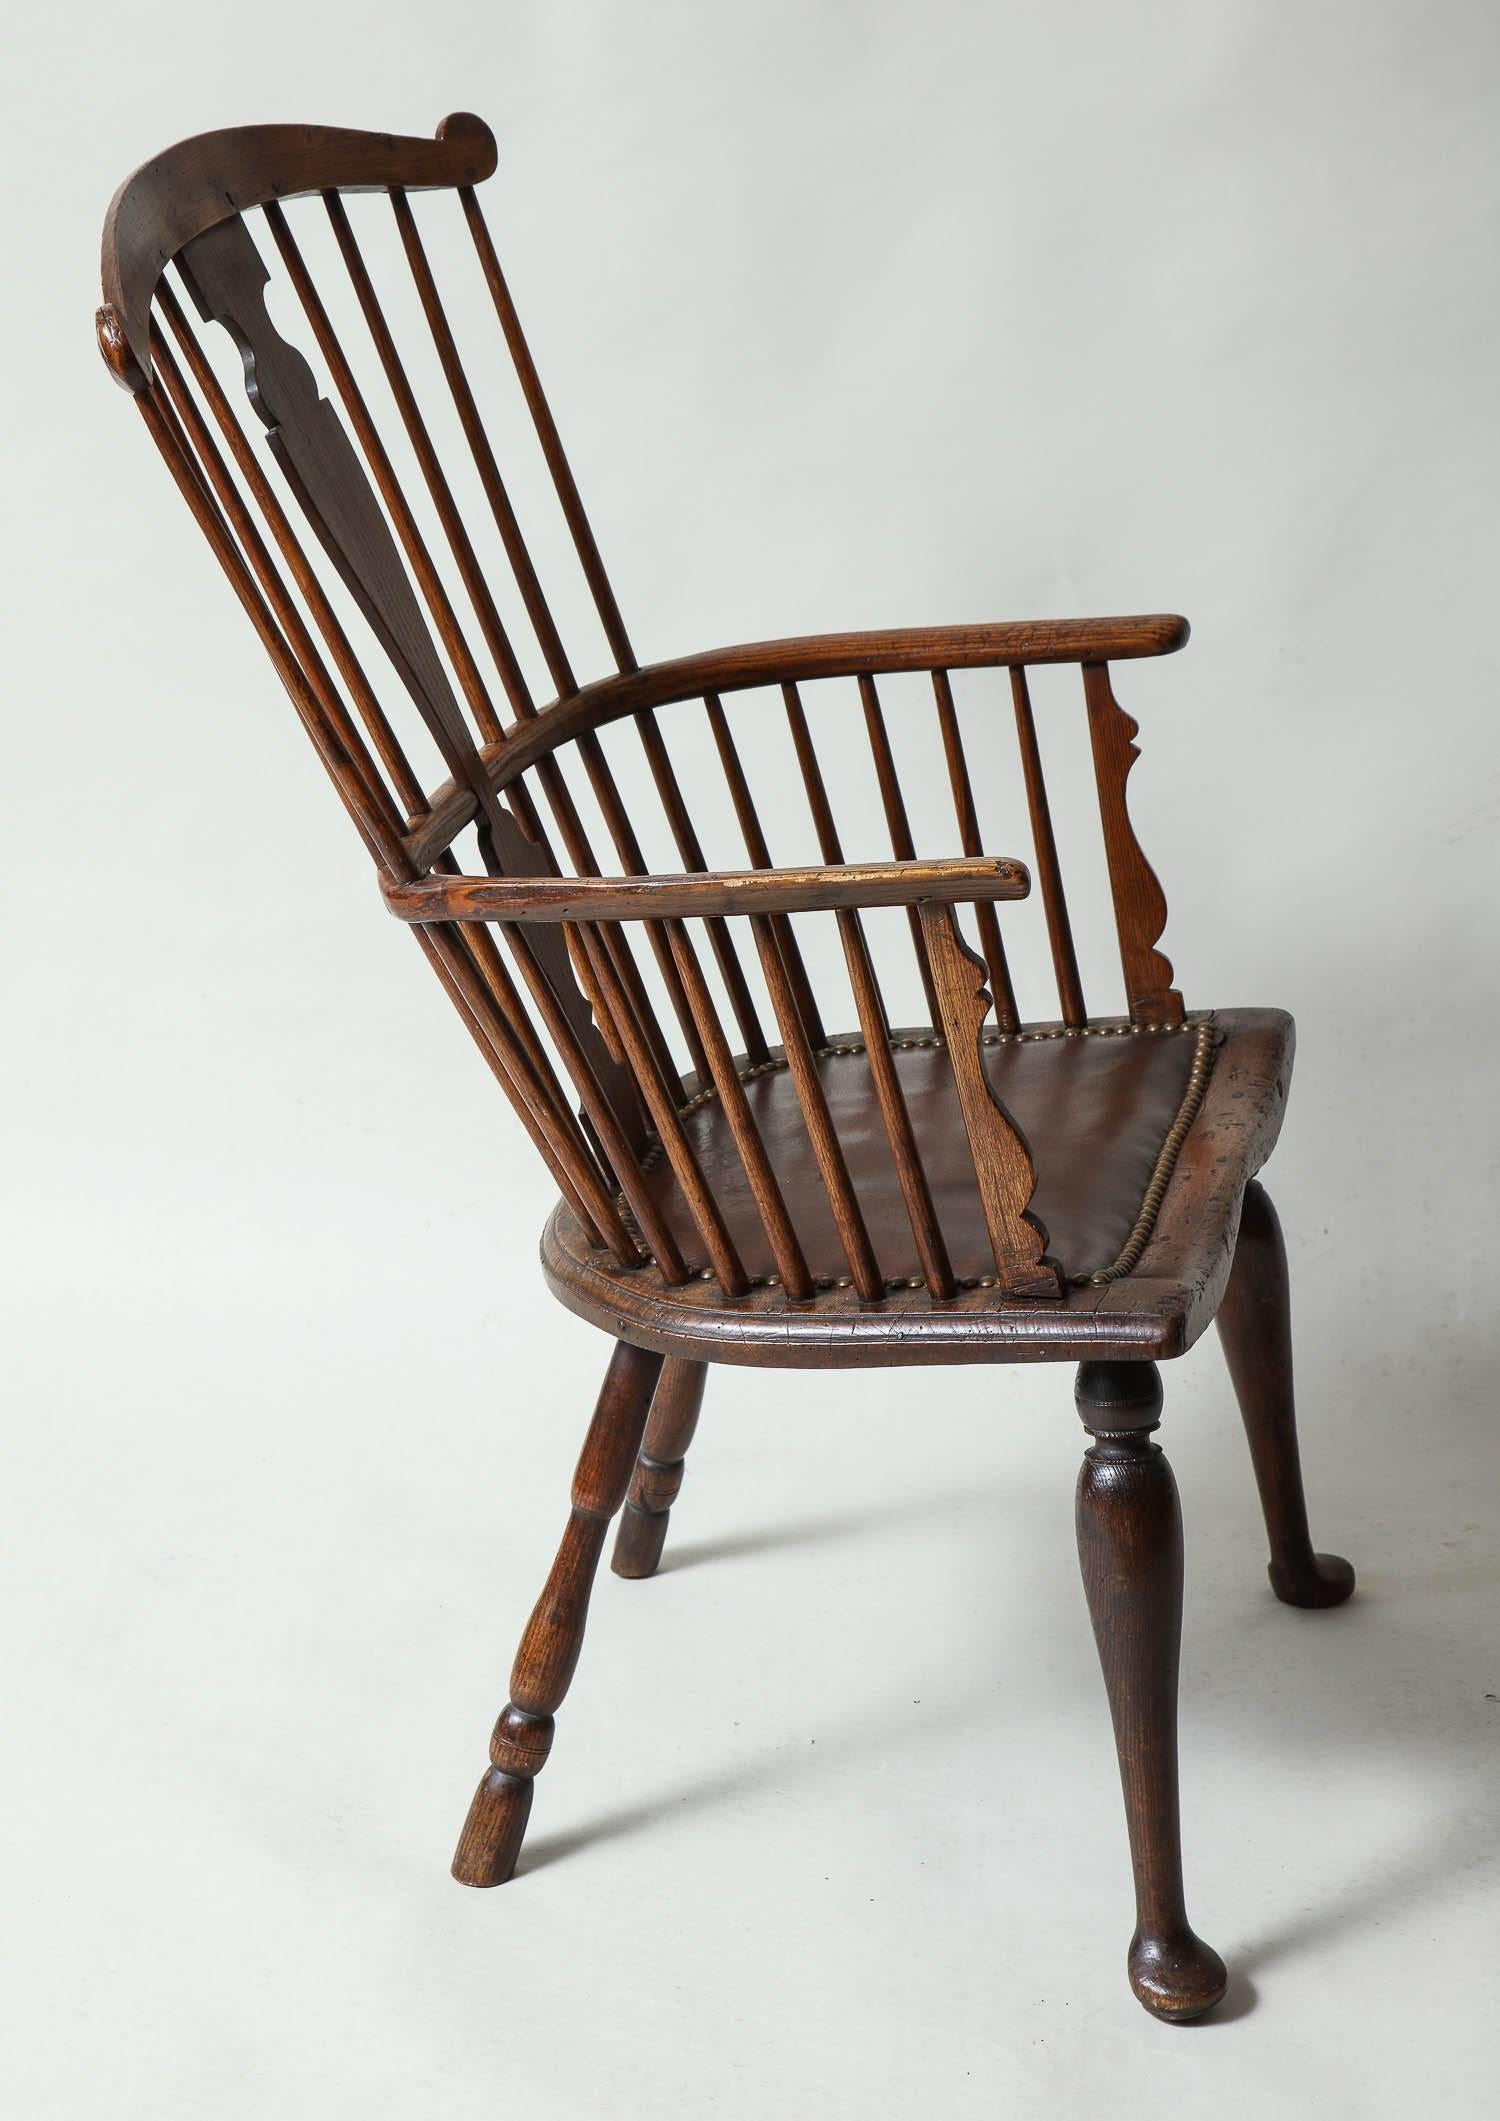 Very good 18th century English Windsor armchair, the shaped crest with lollipop ends over solid vasiform back splat and spindles, the arms with scalloped supports, the saddled seat with beaded edge and leather padded seat, standing on turned legs,